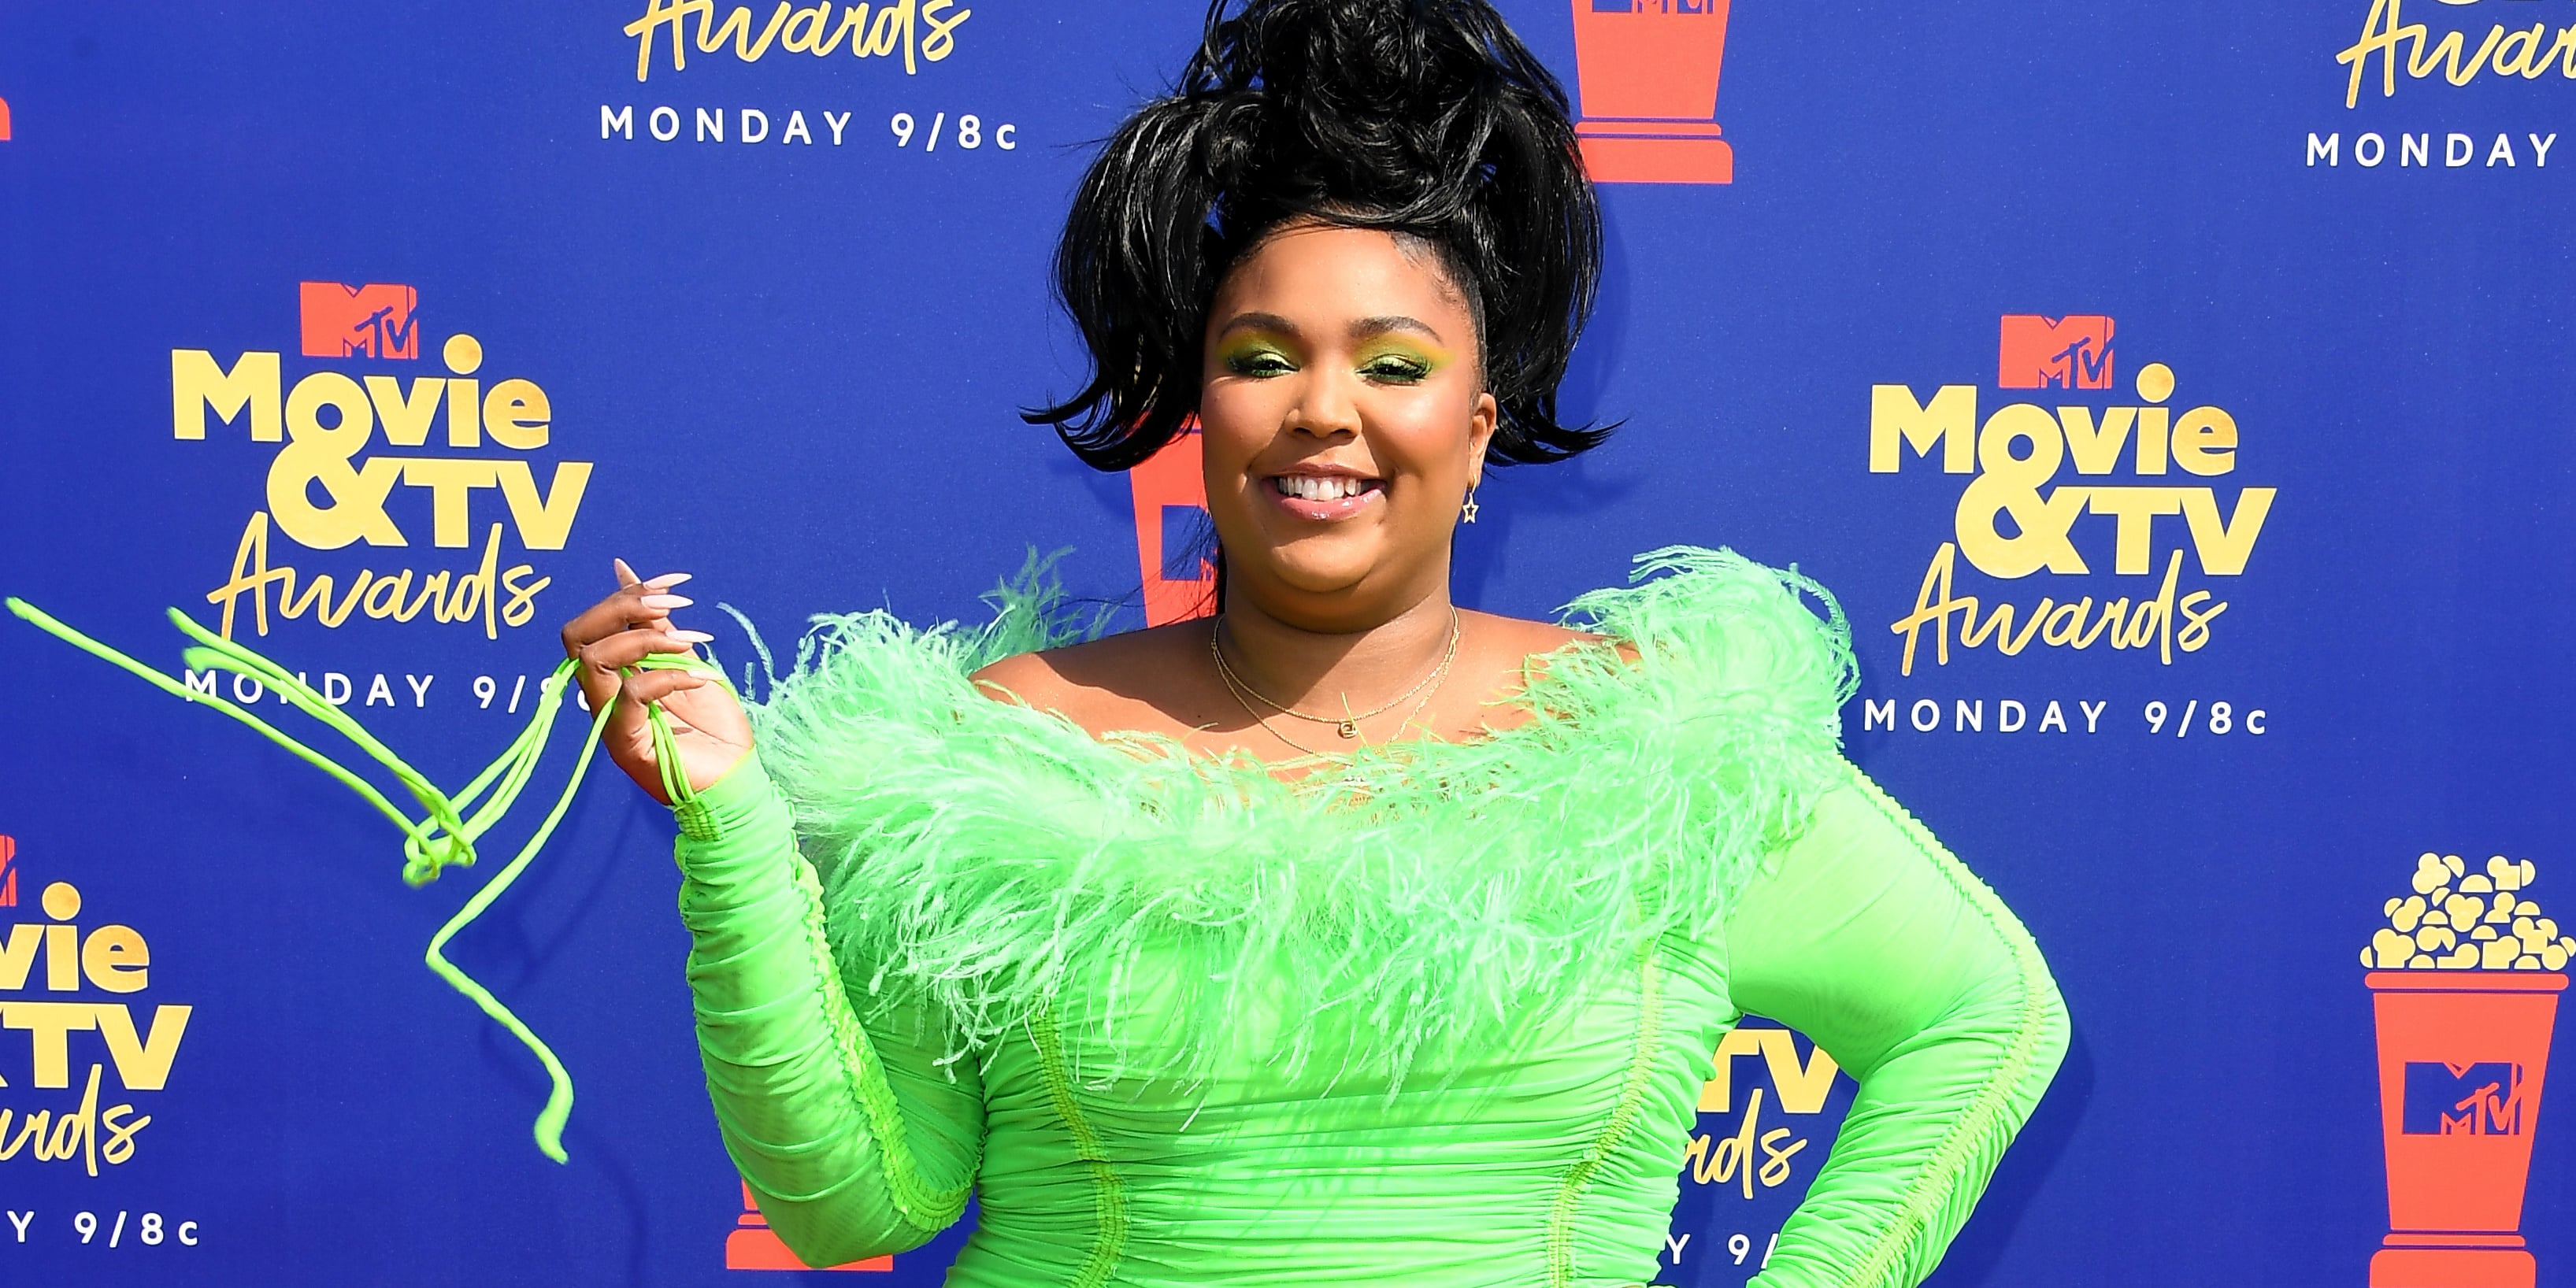 Lizzo's Neon Dress at the 2019 MTV Movie and TV Awards | POPSUGAR Fashion